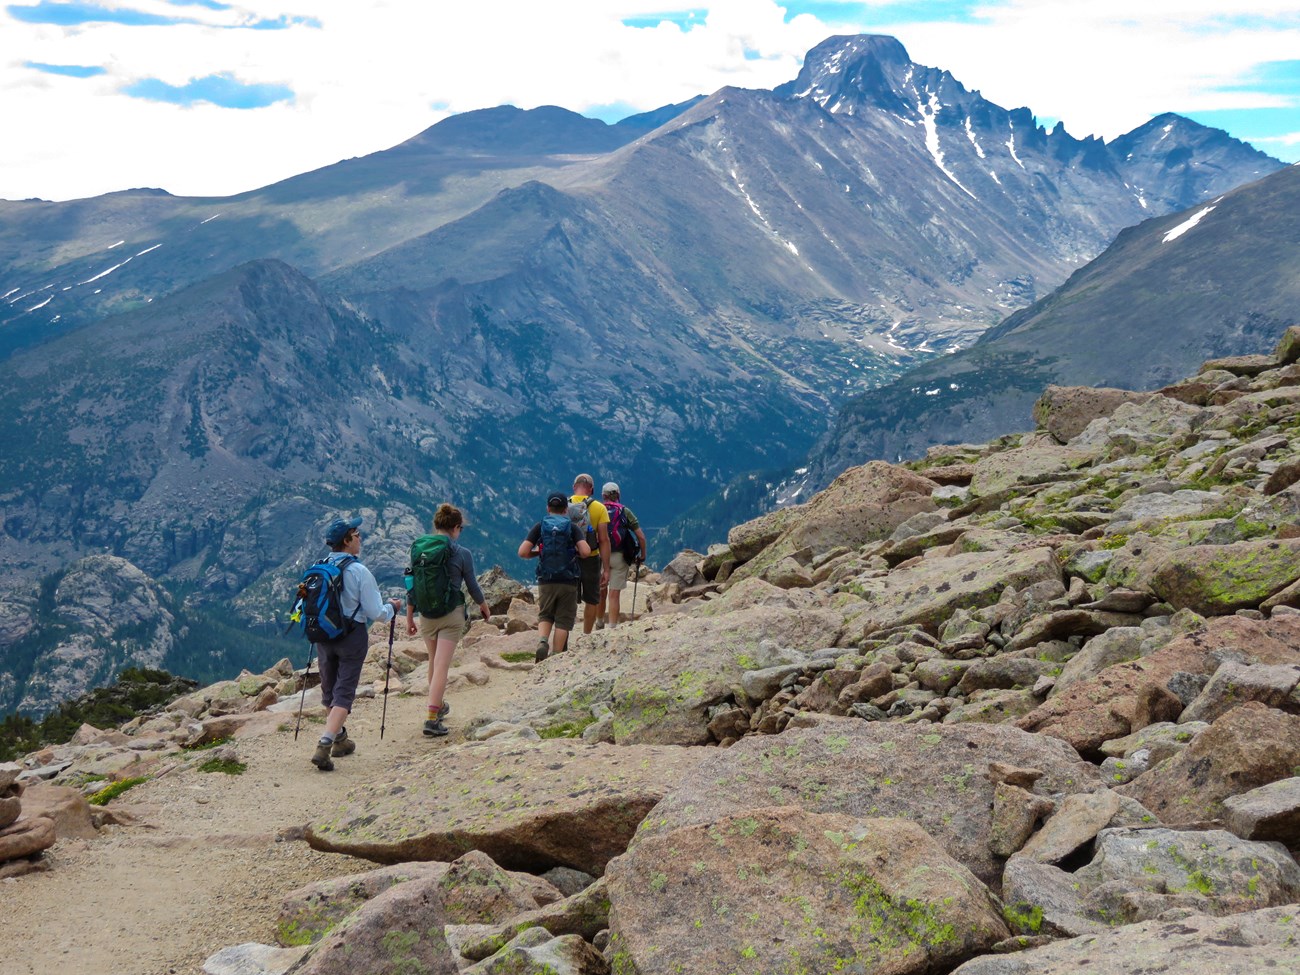 Visit Rocky Mountain National Park and go hiking